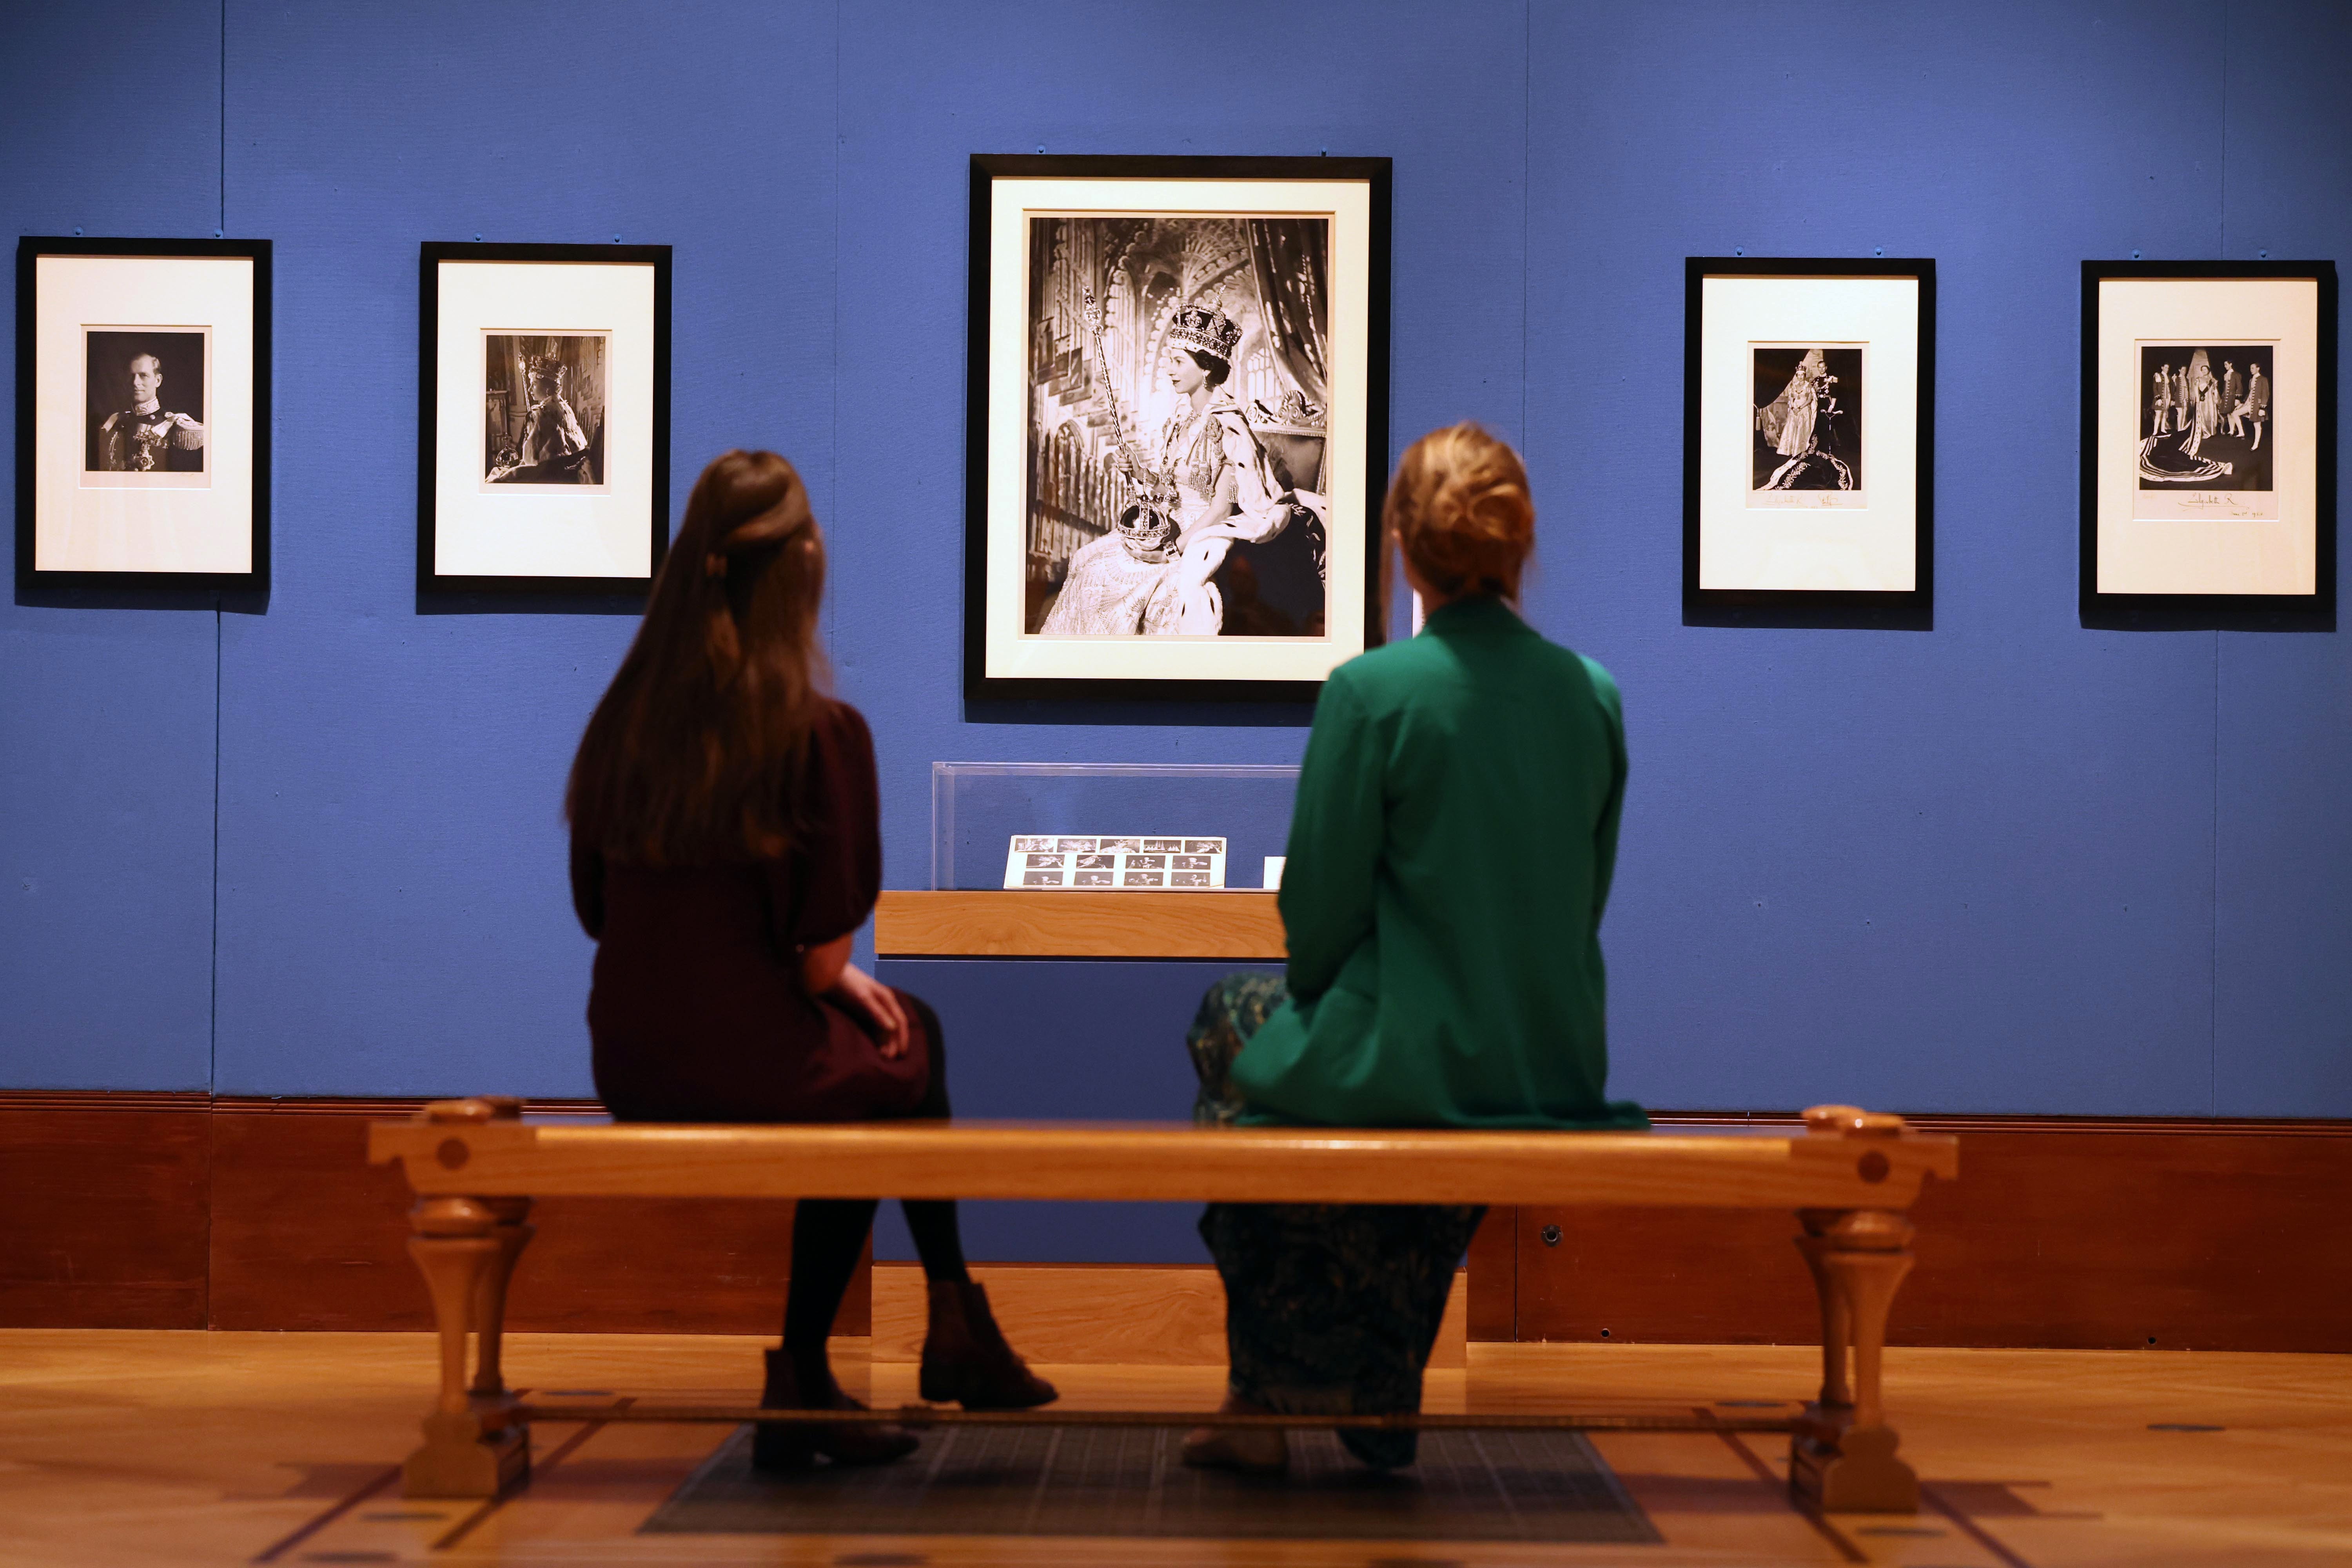 Gallery workers view photographs of Queen Elizabeth II by Cecil Beaton